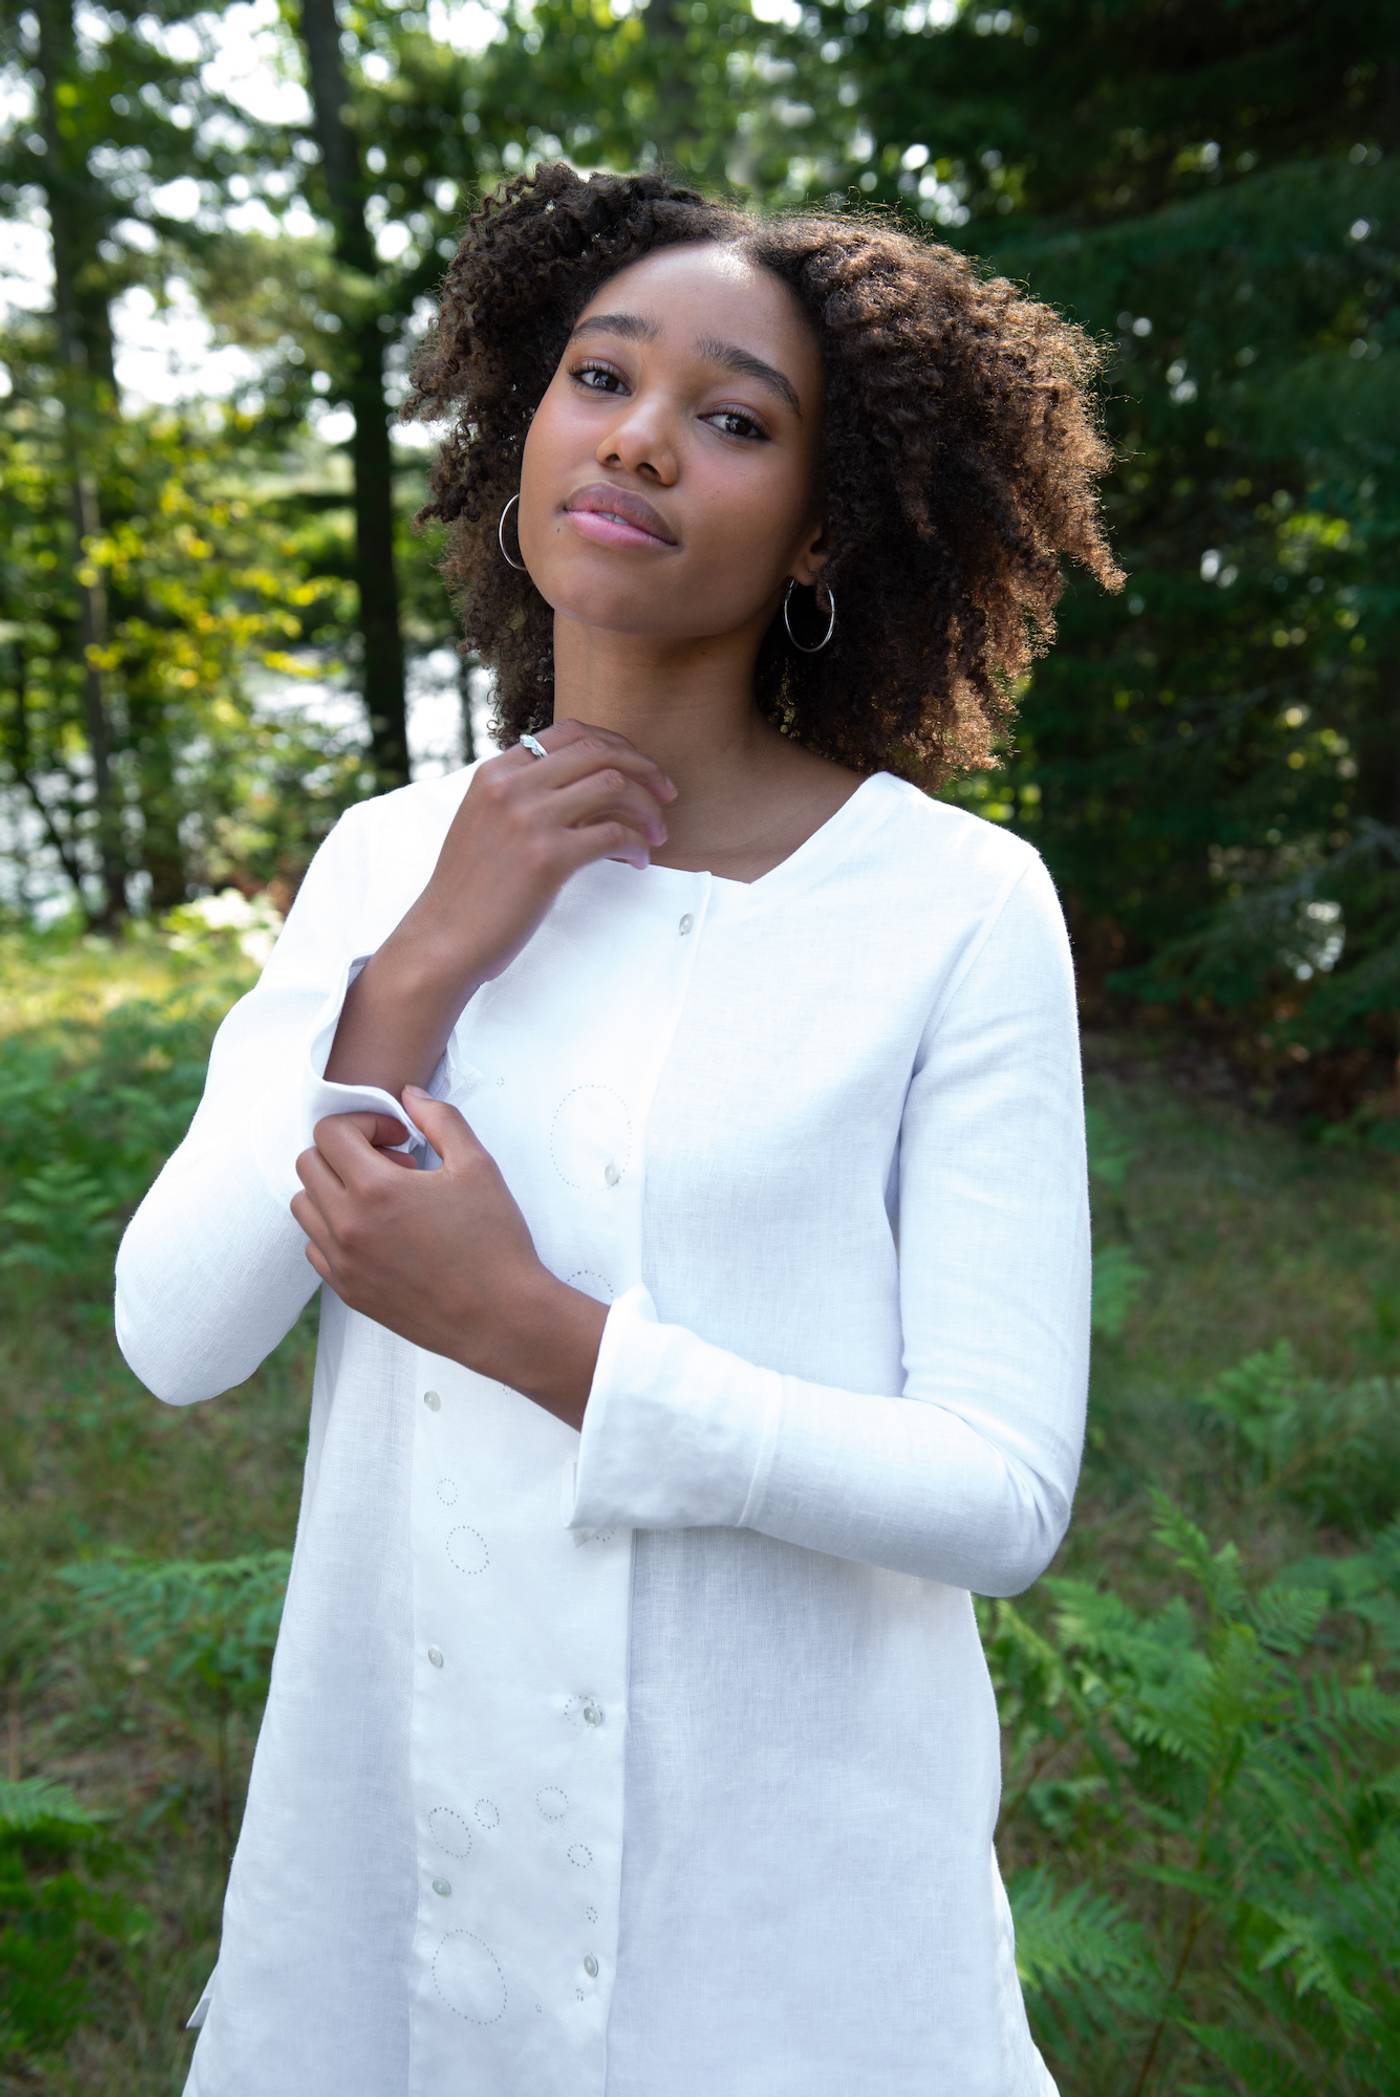 Sophi modeling the white Medulla tunic in a forest setting